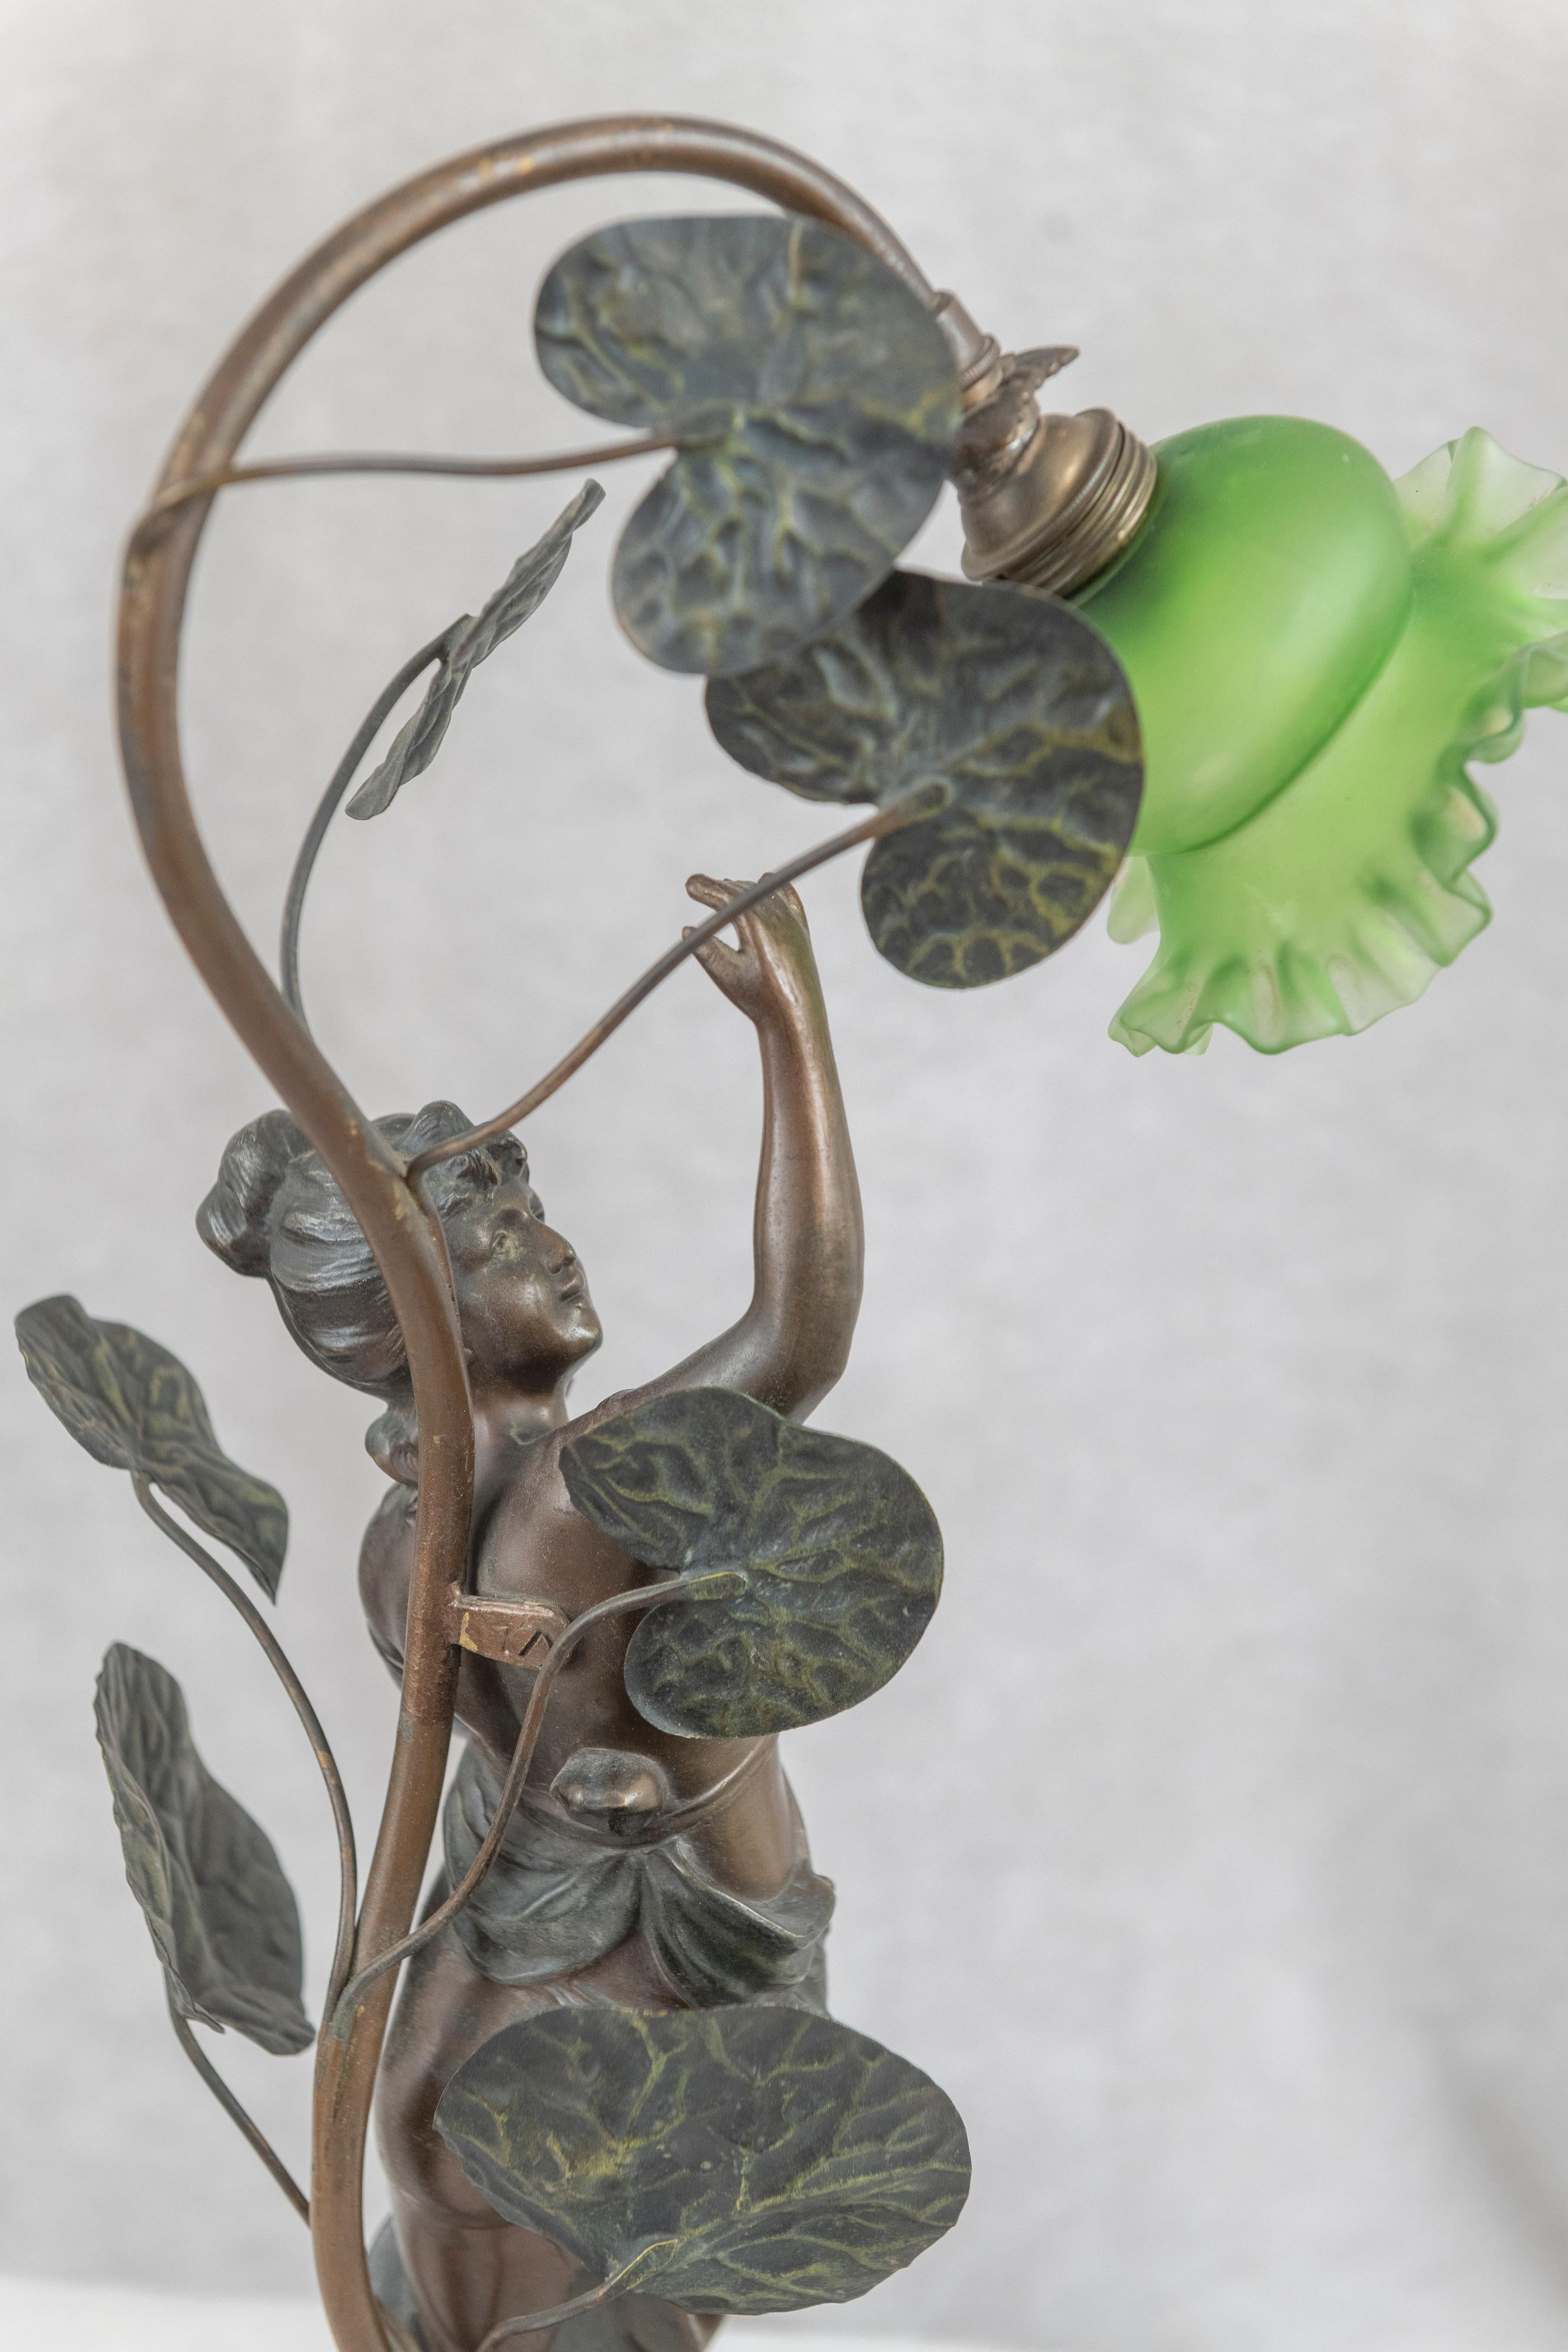 Graceful art nouveau lamp featuring a young lady in nature under a large plant holding the original green glass shade. The sculpture is well modeled and displays a 2 color factory patina. The particularly small green glass shade is hand blown and